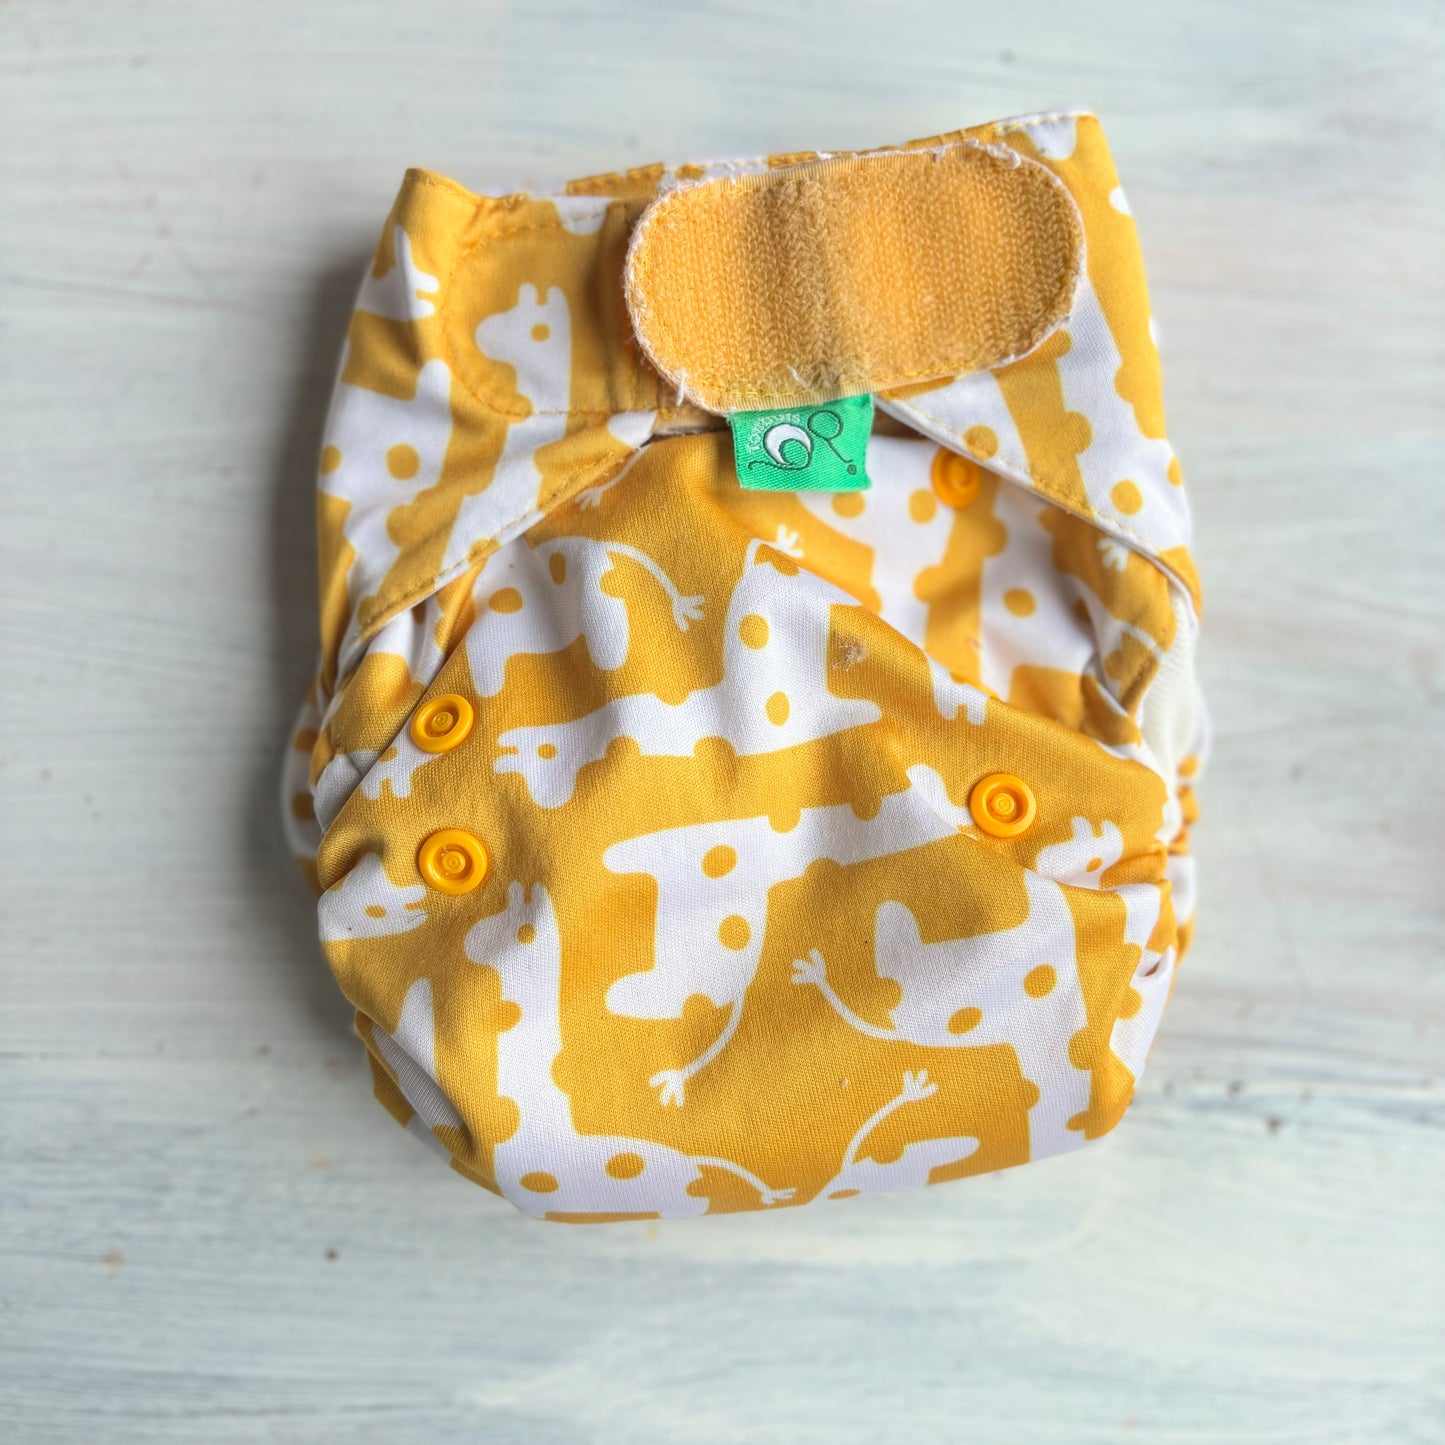 Tots Bots Easyfit All in One Nappy-All In One Nappy-Tots Bots-Giggleraff-The Nappy Market